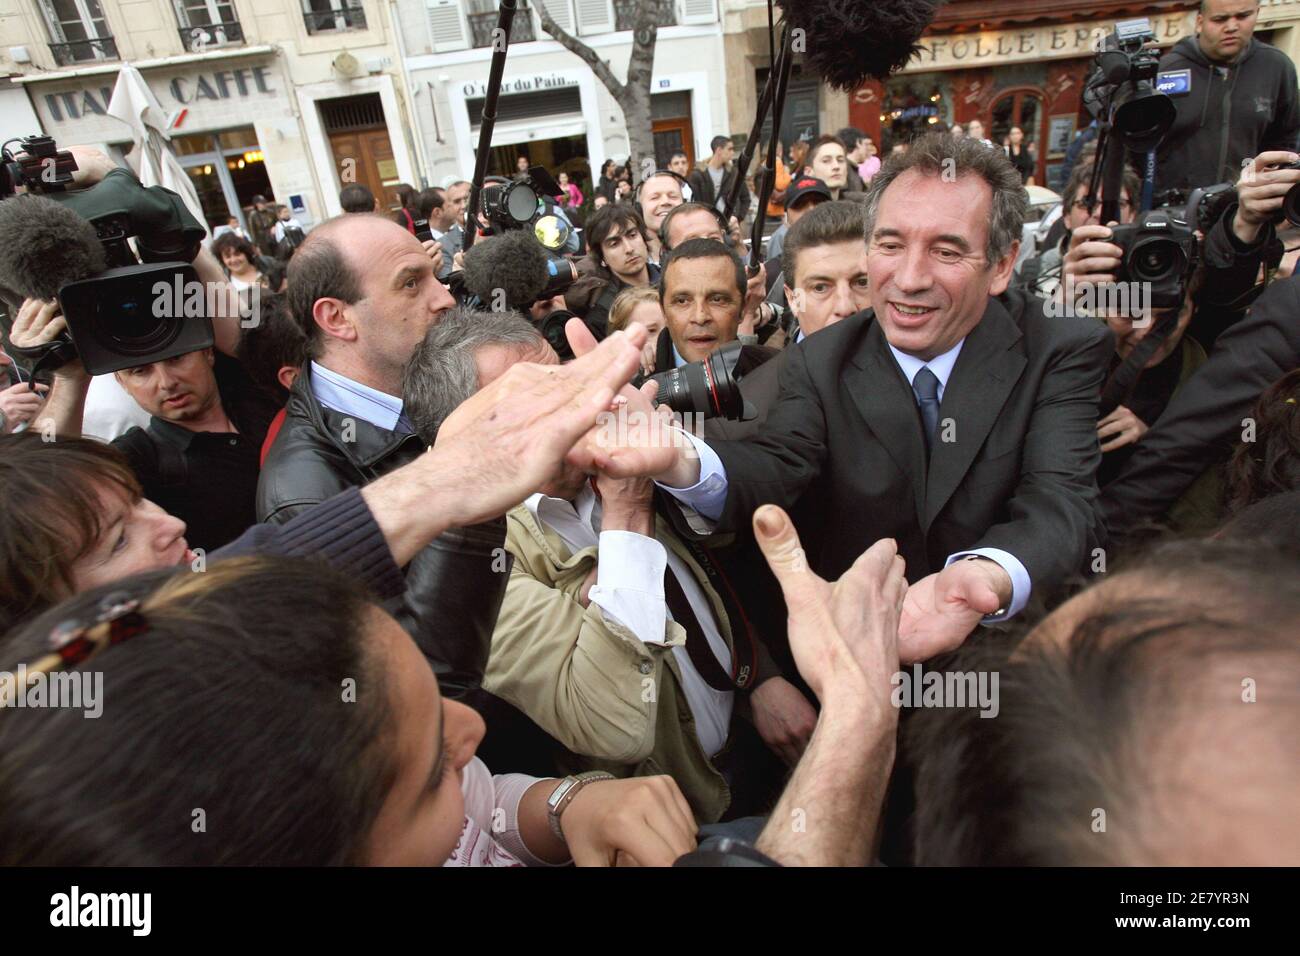 UDF presidential candidate Francois Bayrou campaigns in Marseille, Southern France, on April 12, 2007. Photo by Corentin Fohlen/ABACAPRESS.COM Stock Photo